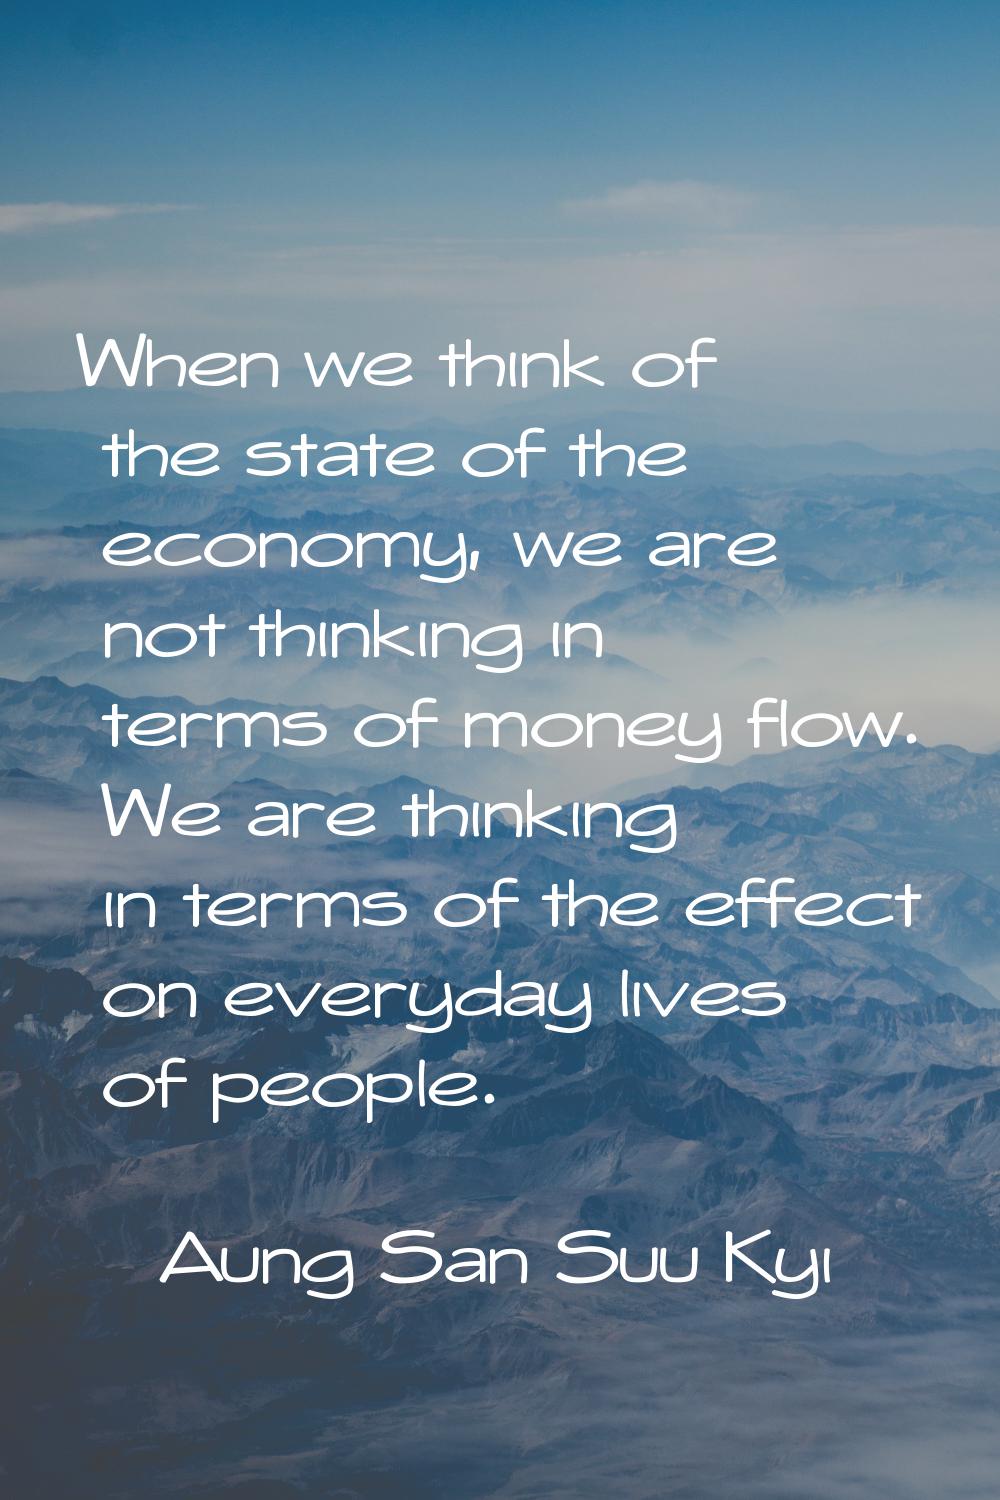 When we think of the state of the economy, we are not thinking in terms of money flow. We are think